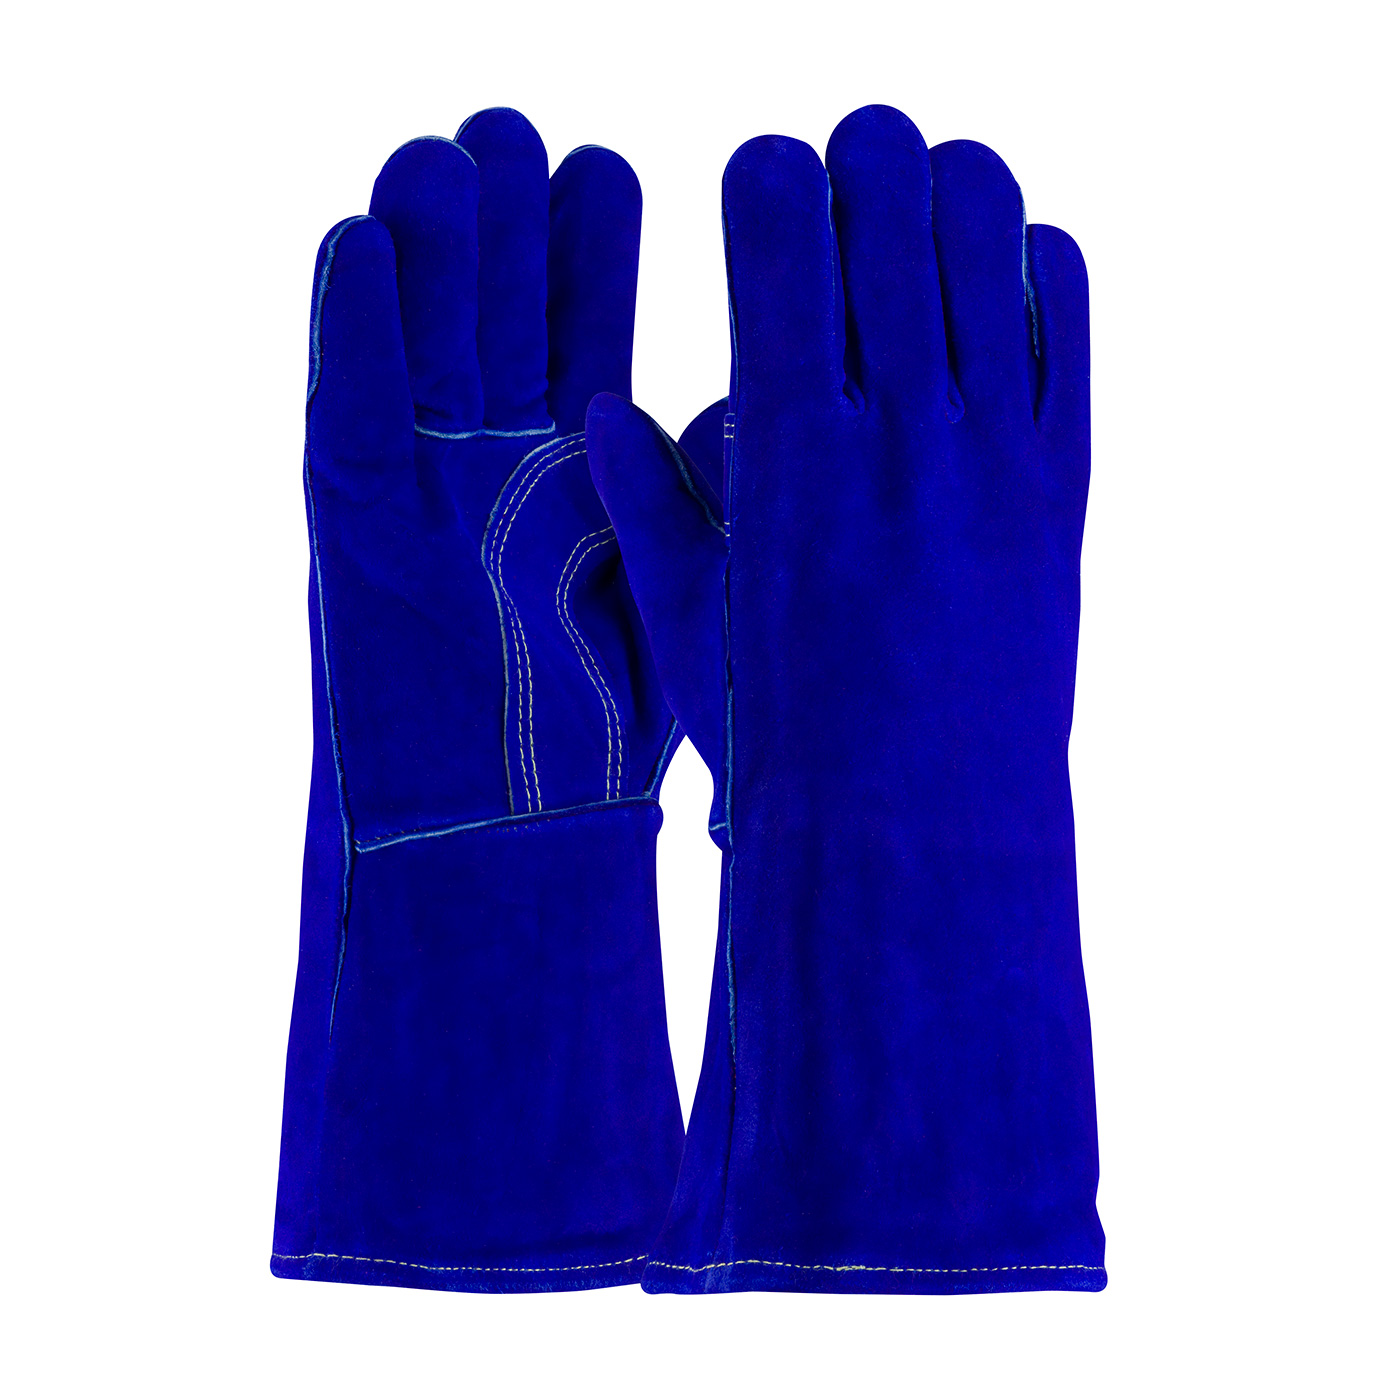 Gloves For Protection From Heat